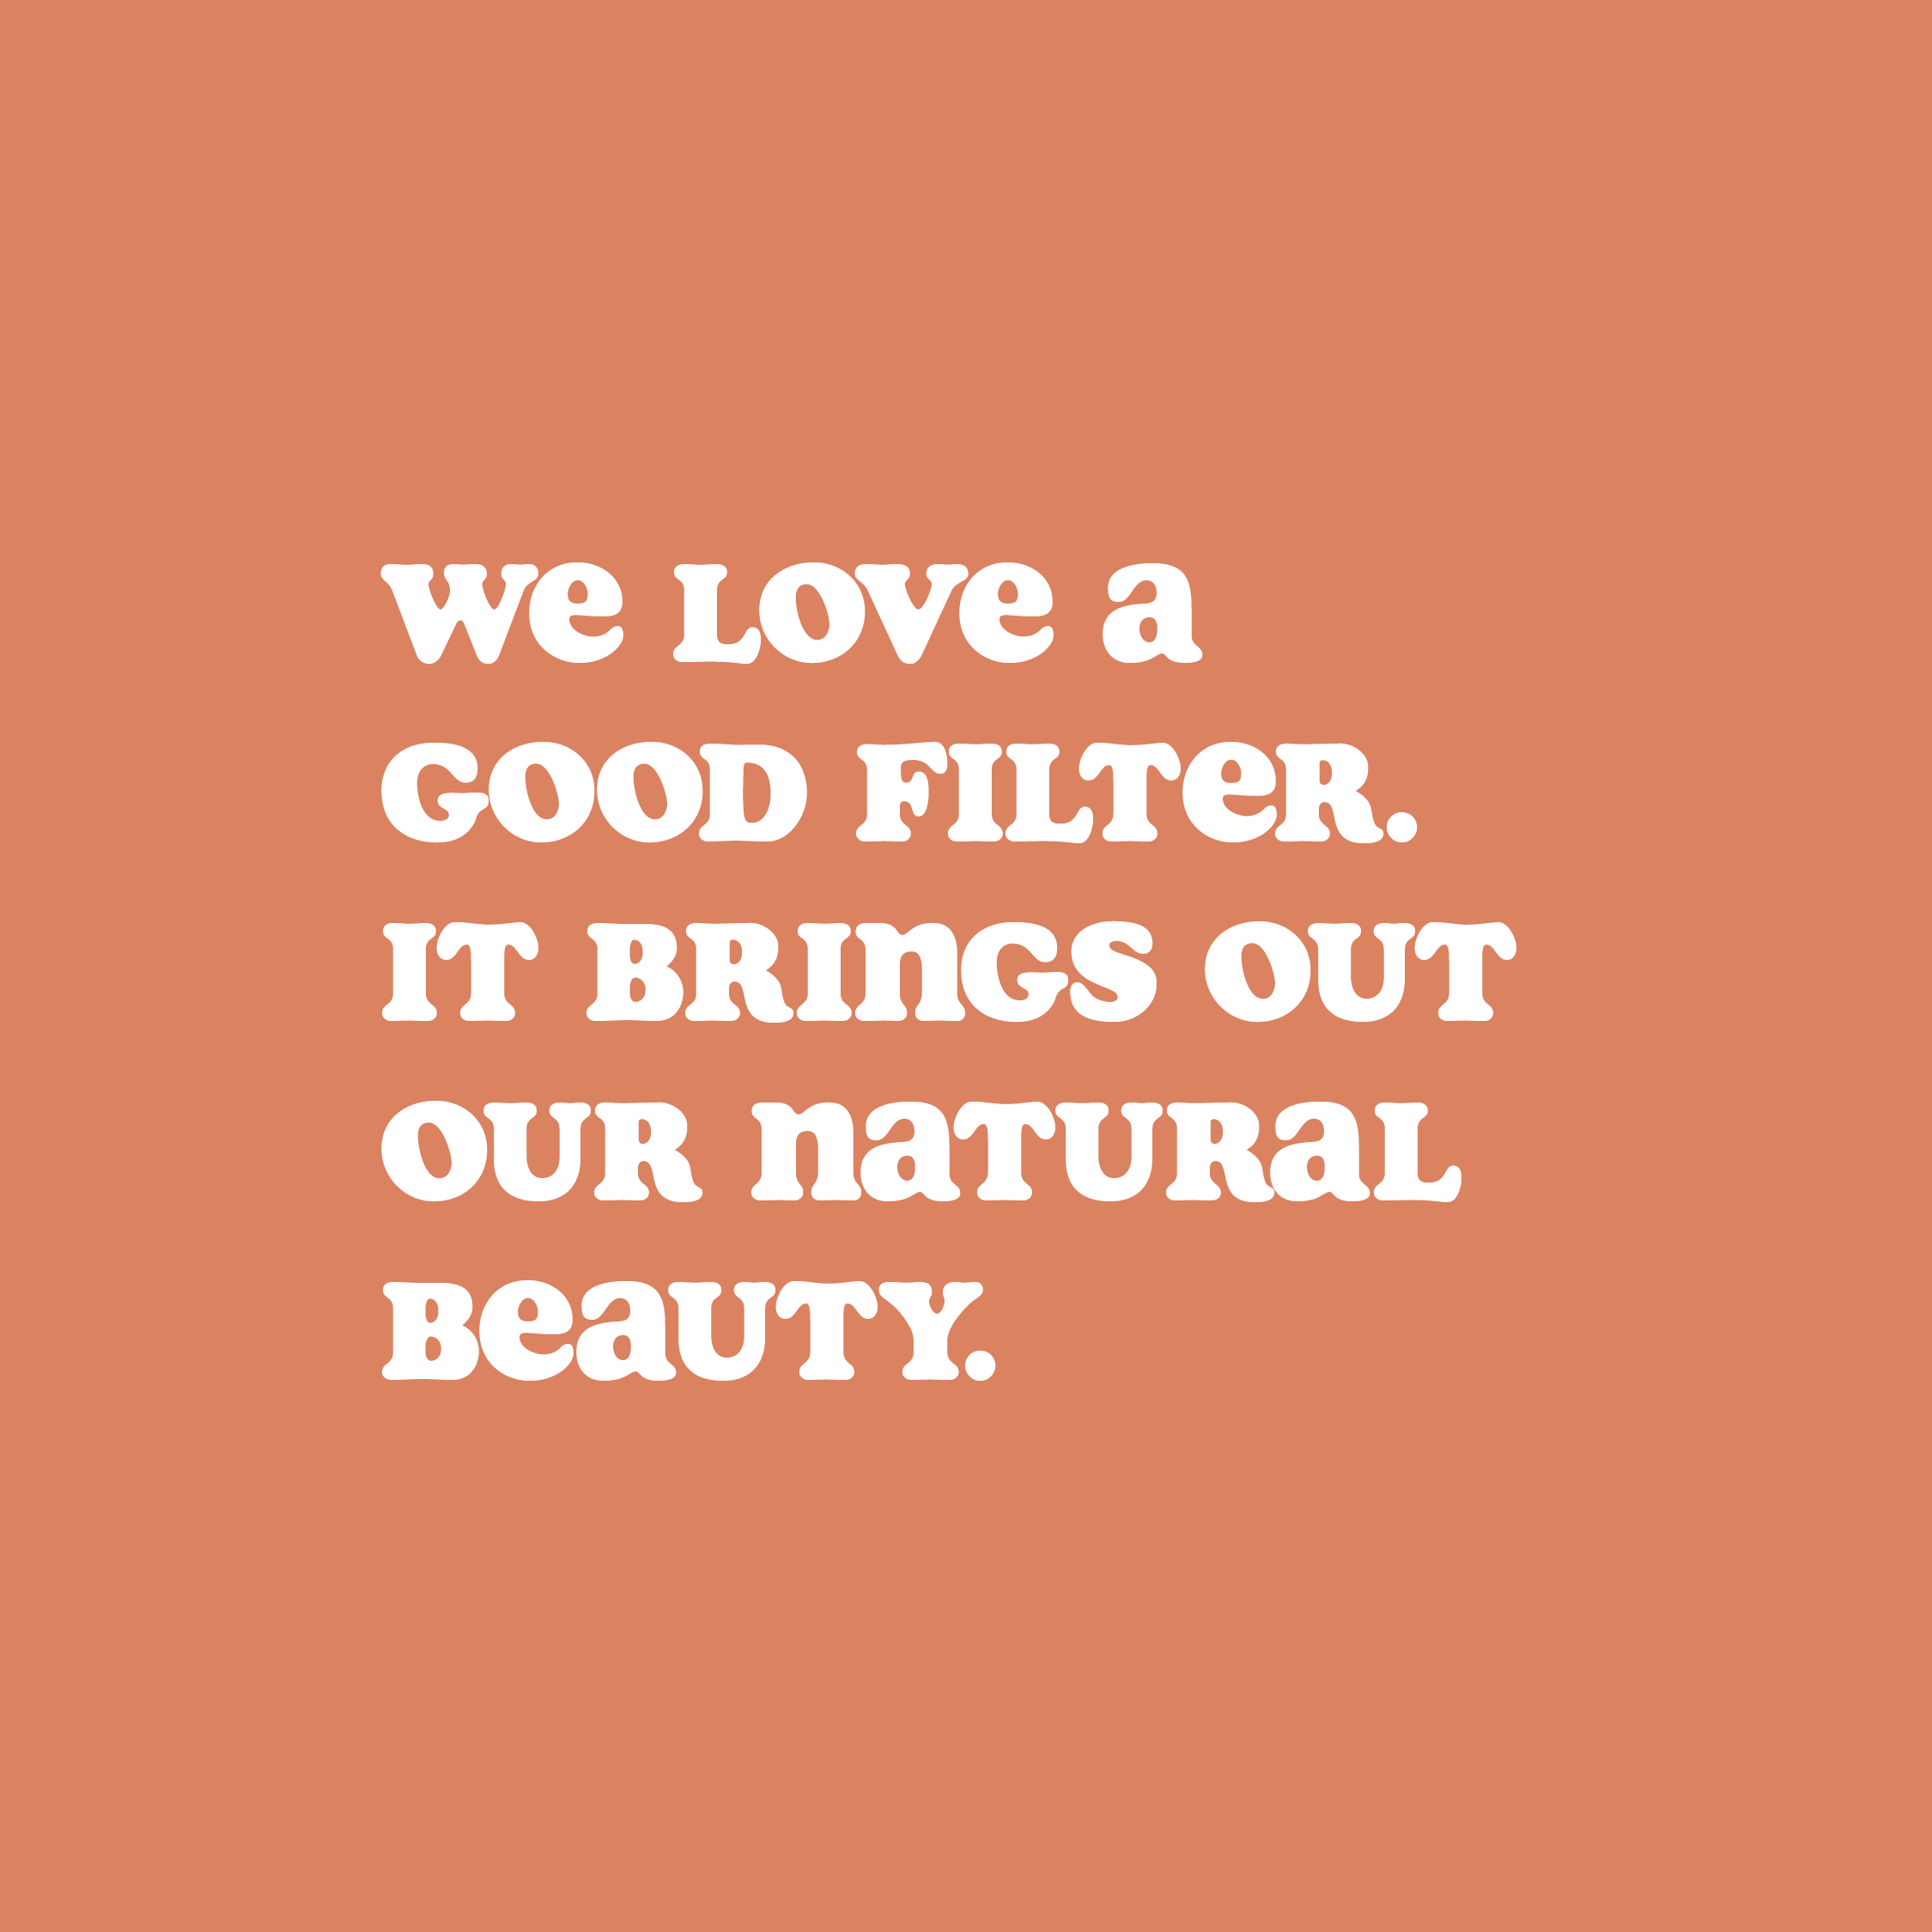 White type sits on a dark peach background. It says 'We love a good filter. It brings out our natural beauty.' Designed to look like the quotes often seen on social media.